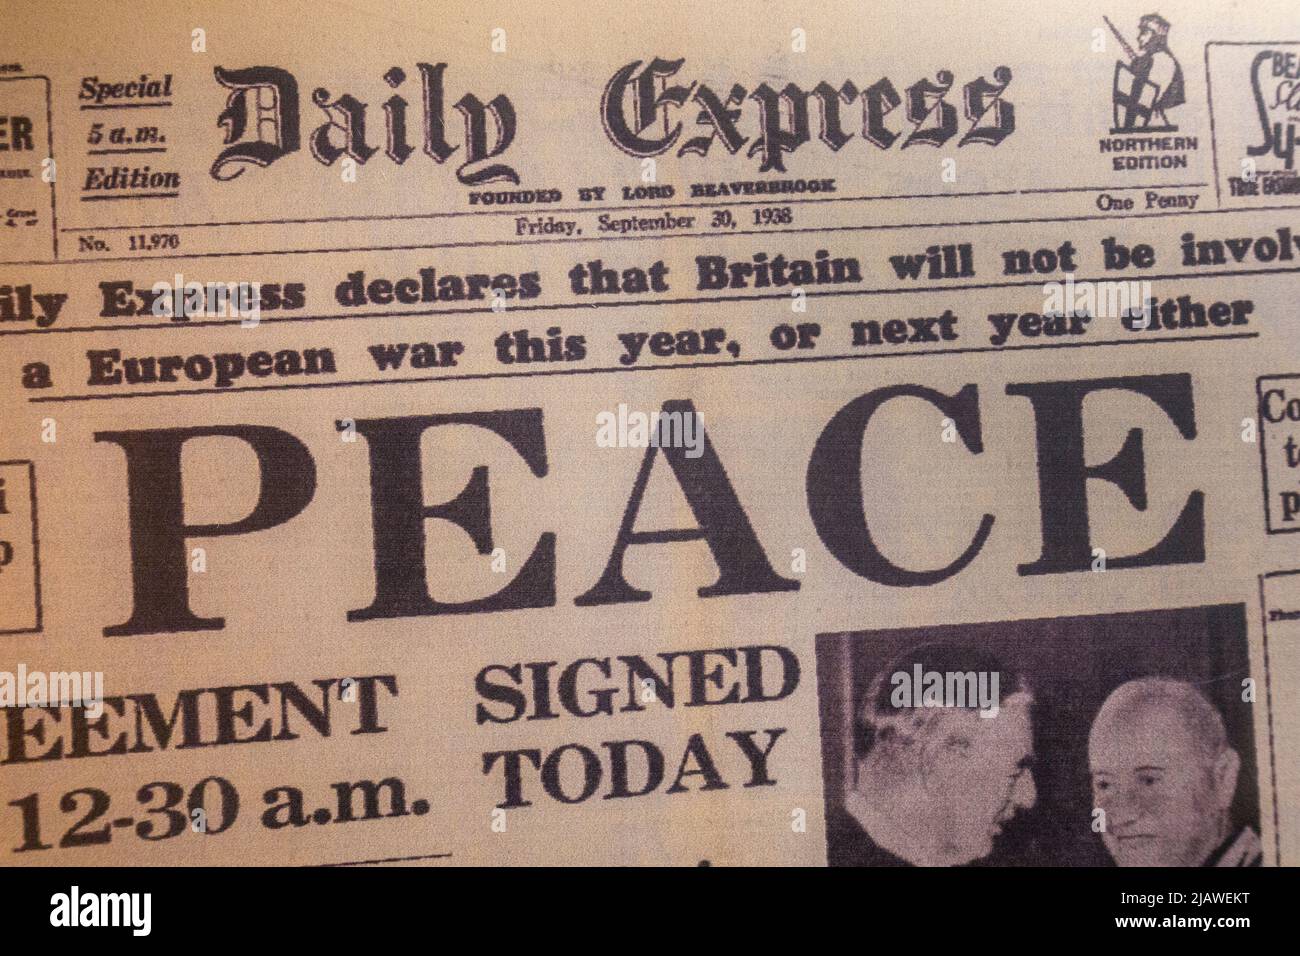 'Peace' headline in the Daily Express newspaper on 30th September 1938 after Neville Chamberlain signed the Munich Agreement with Nazi Germany. Stock Photo